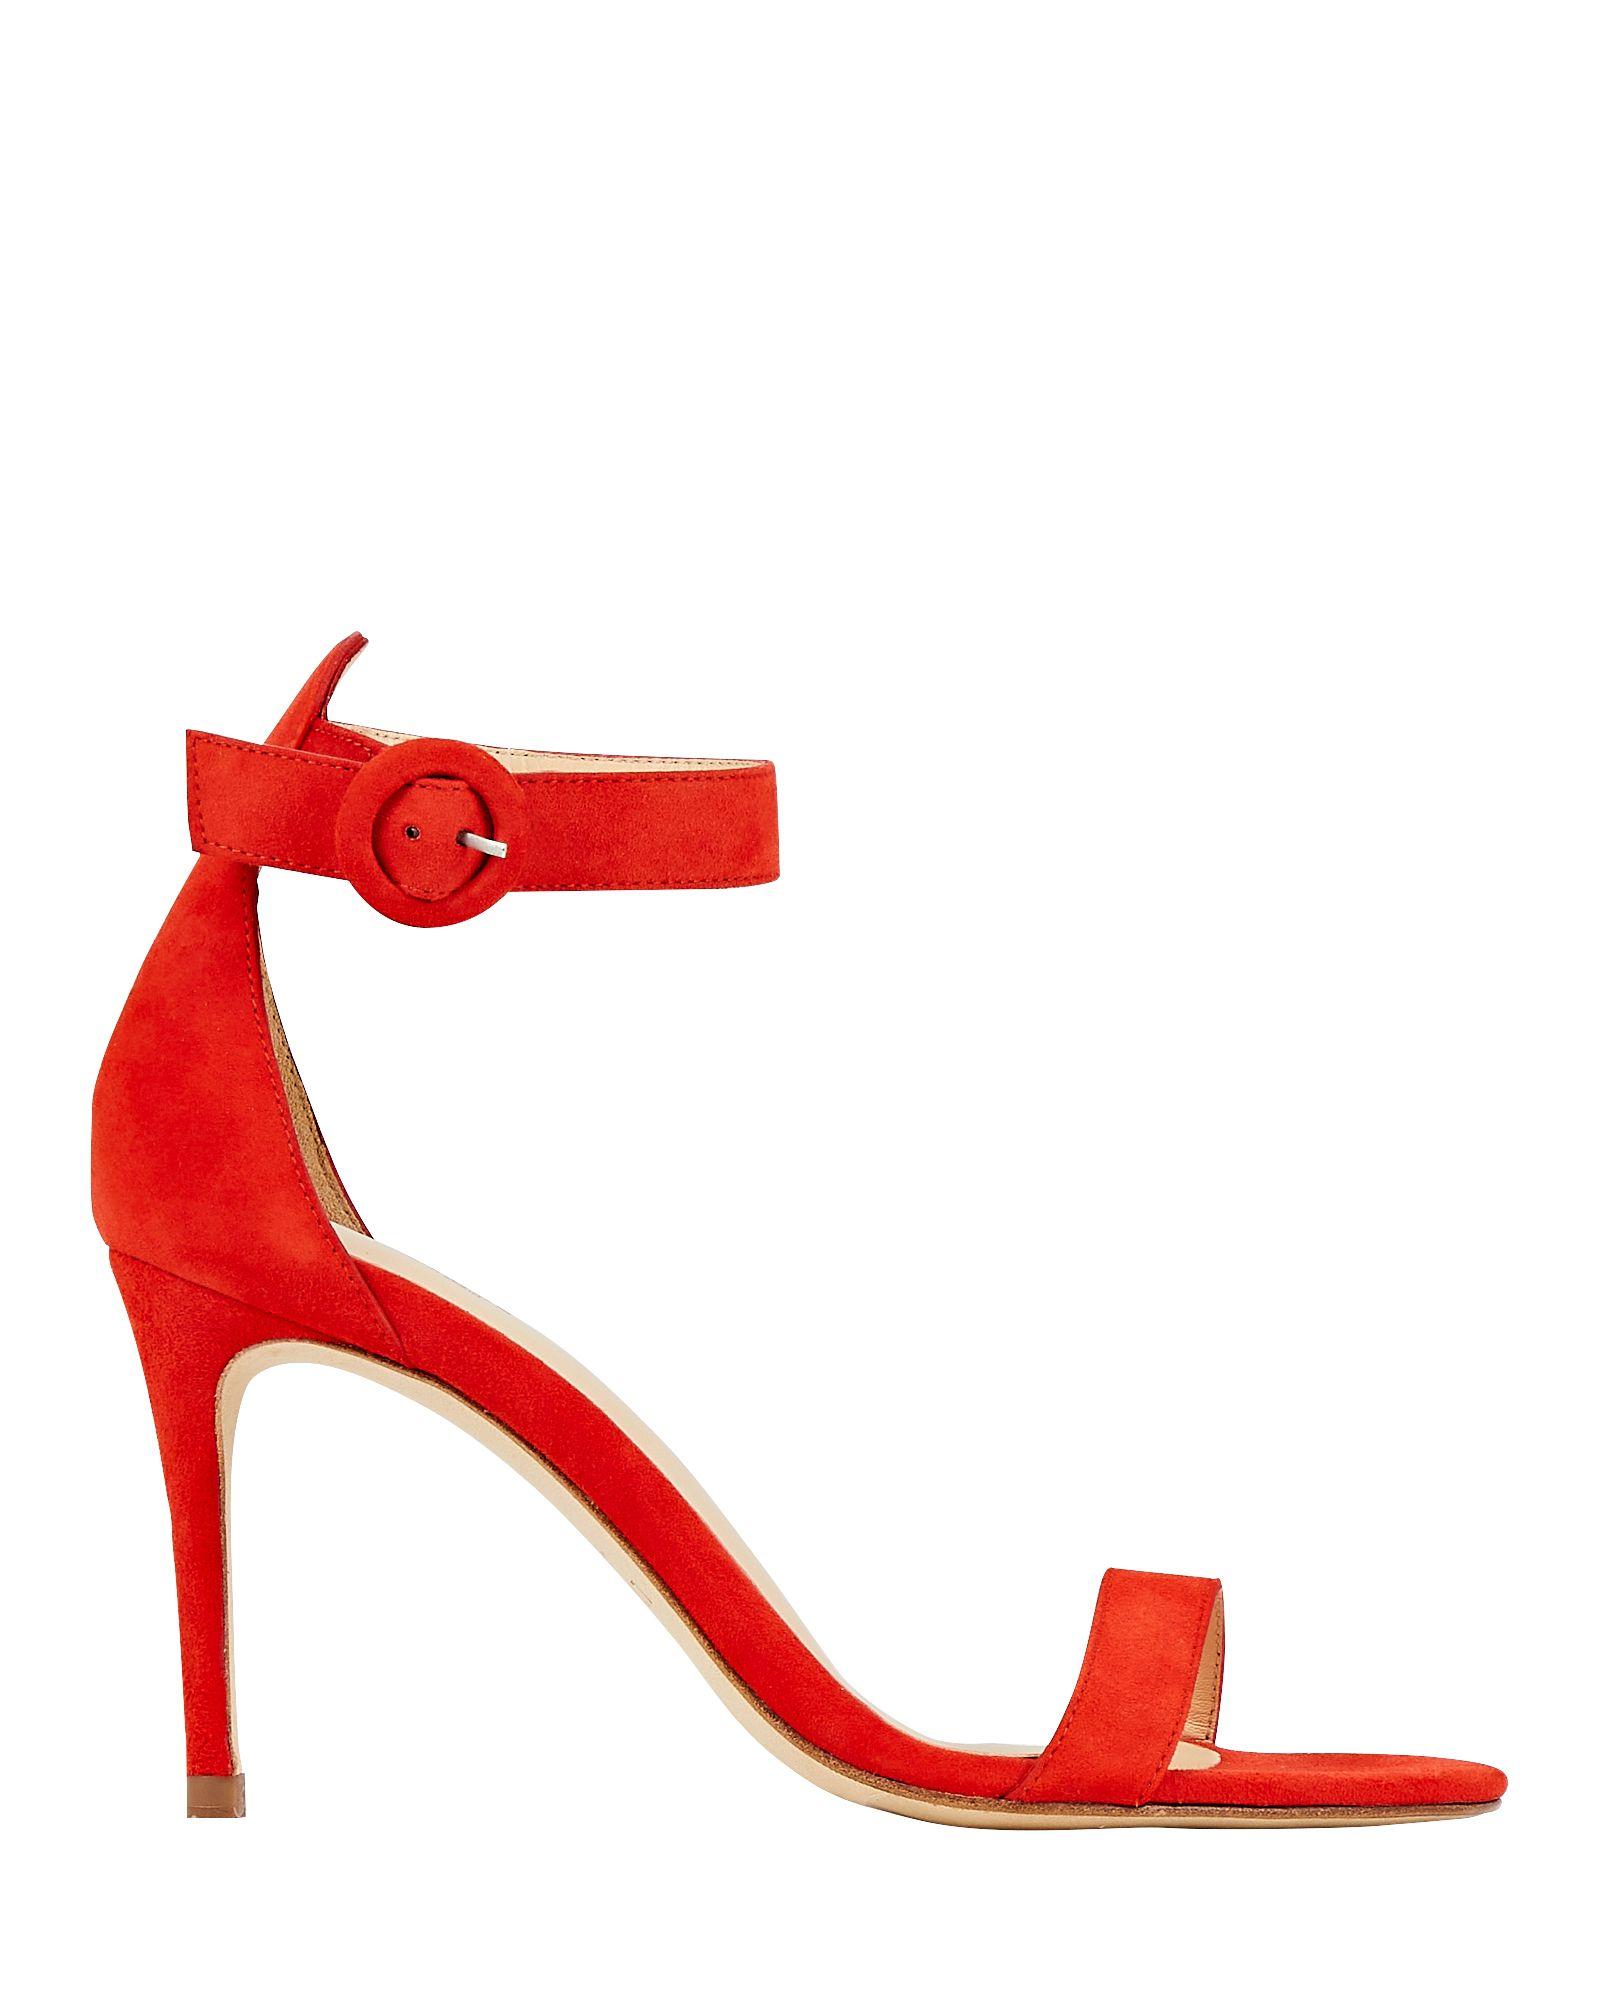 L'Agence Gisele Suede Sandals in Red | Lyst